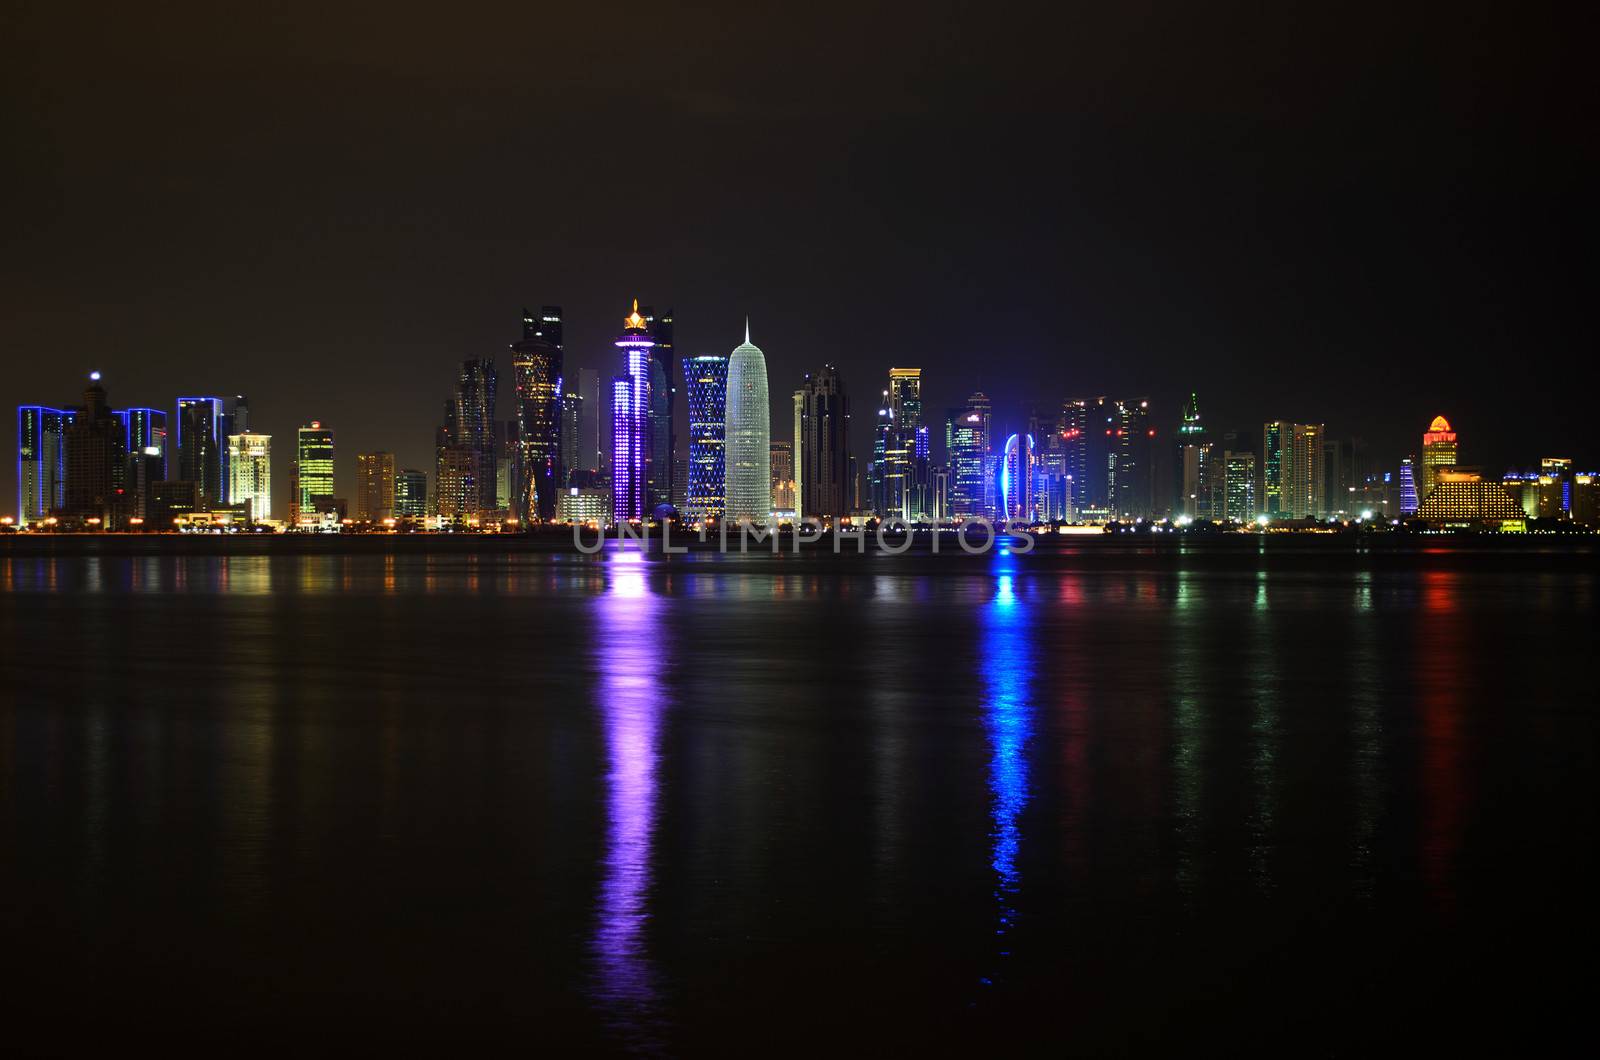 The illuminated skyline of the commercial center of Doha, the capital of the Arabian Gulf country Qatar at night.